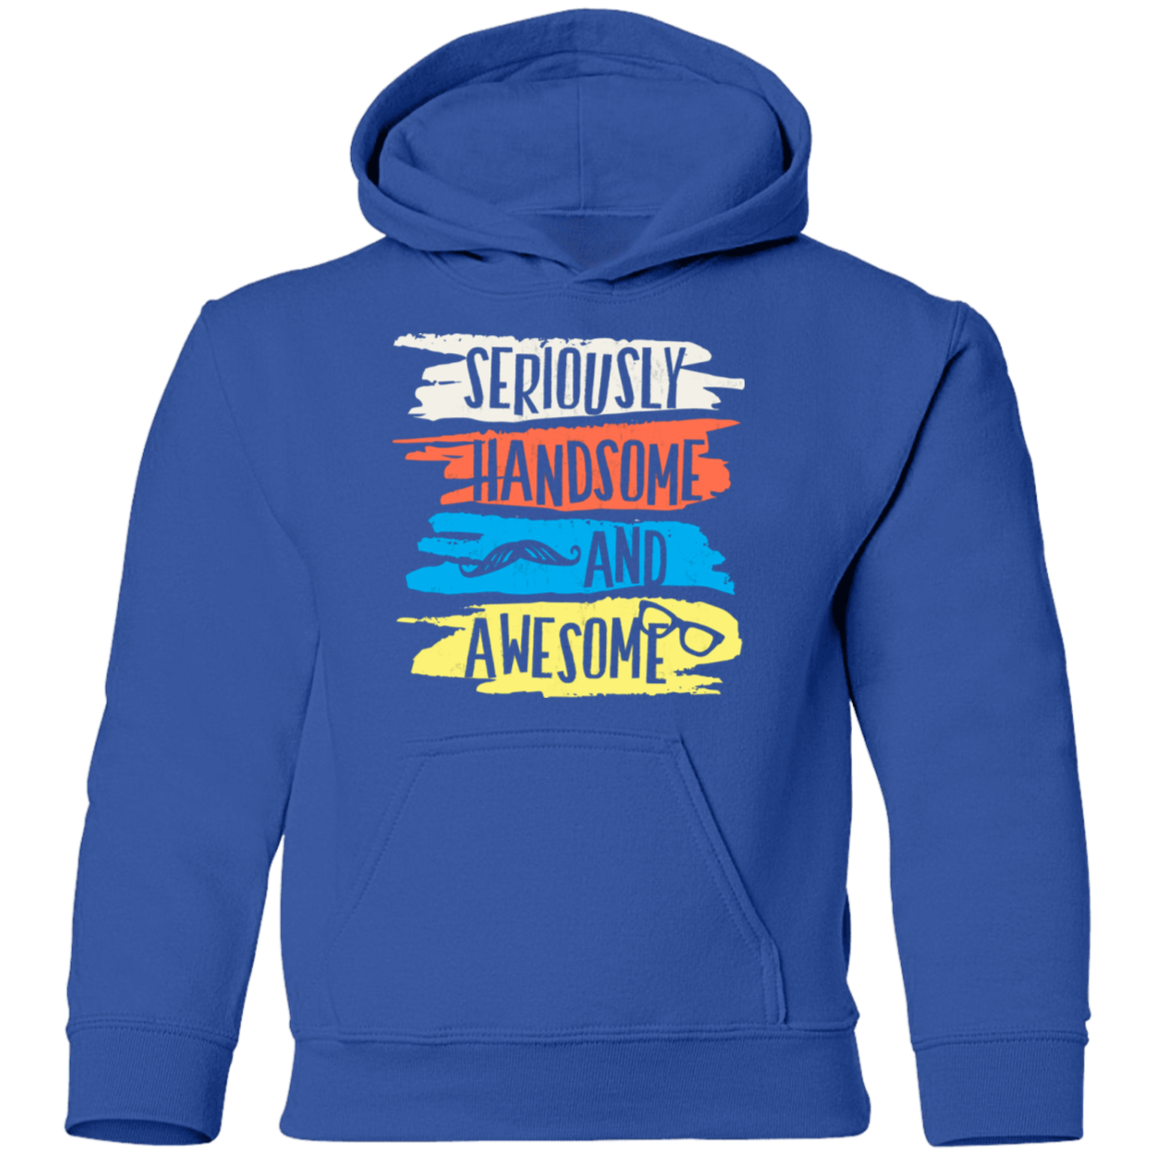 Seriously Handsome Awesome Kids Hoodie